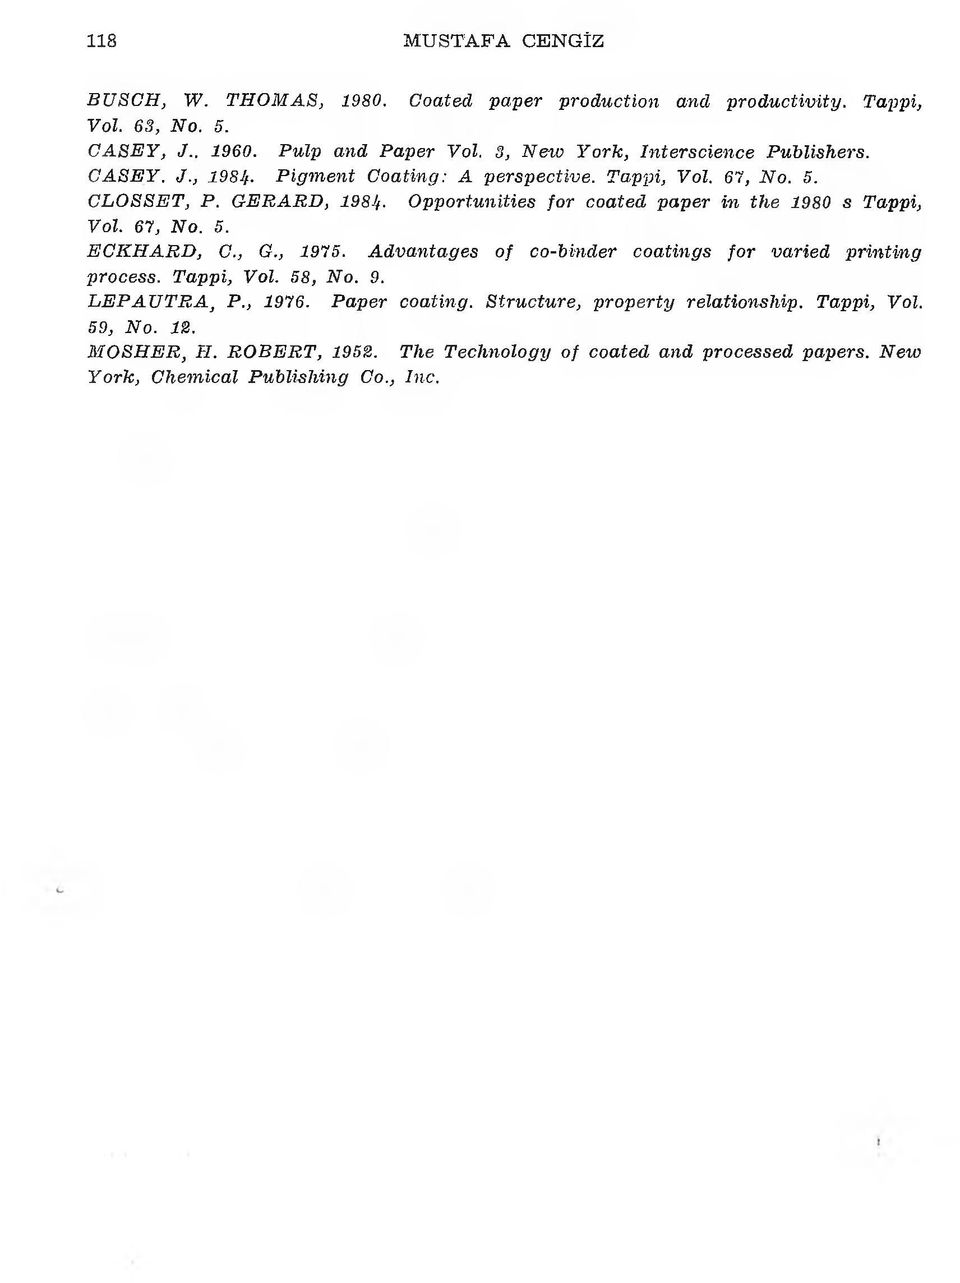 O pportunities fo r coated paper in th e 1980 s Tappi, Vol. 67, N o. 5. E C K H A R D, C., G., 1915. A d va n ta g es of co-binder coatings fo r varied p rinting process. Tappi, Vol. 58, N o.